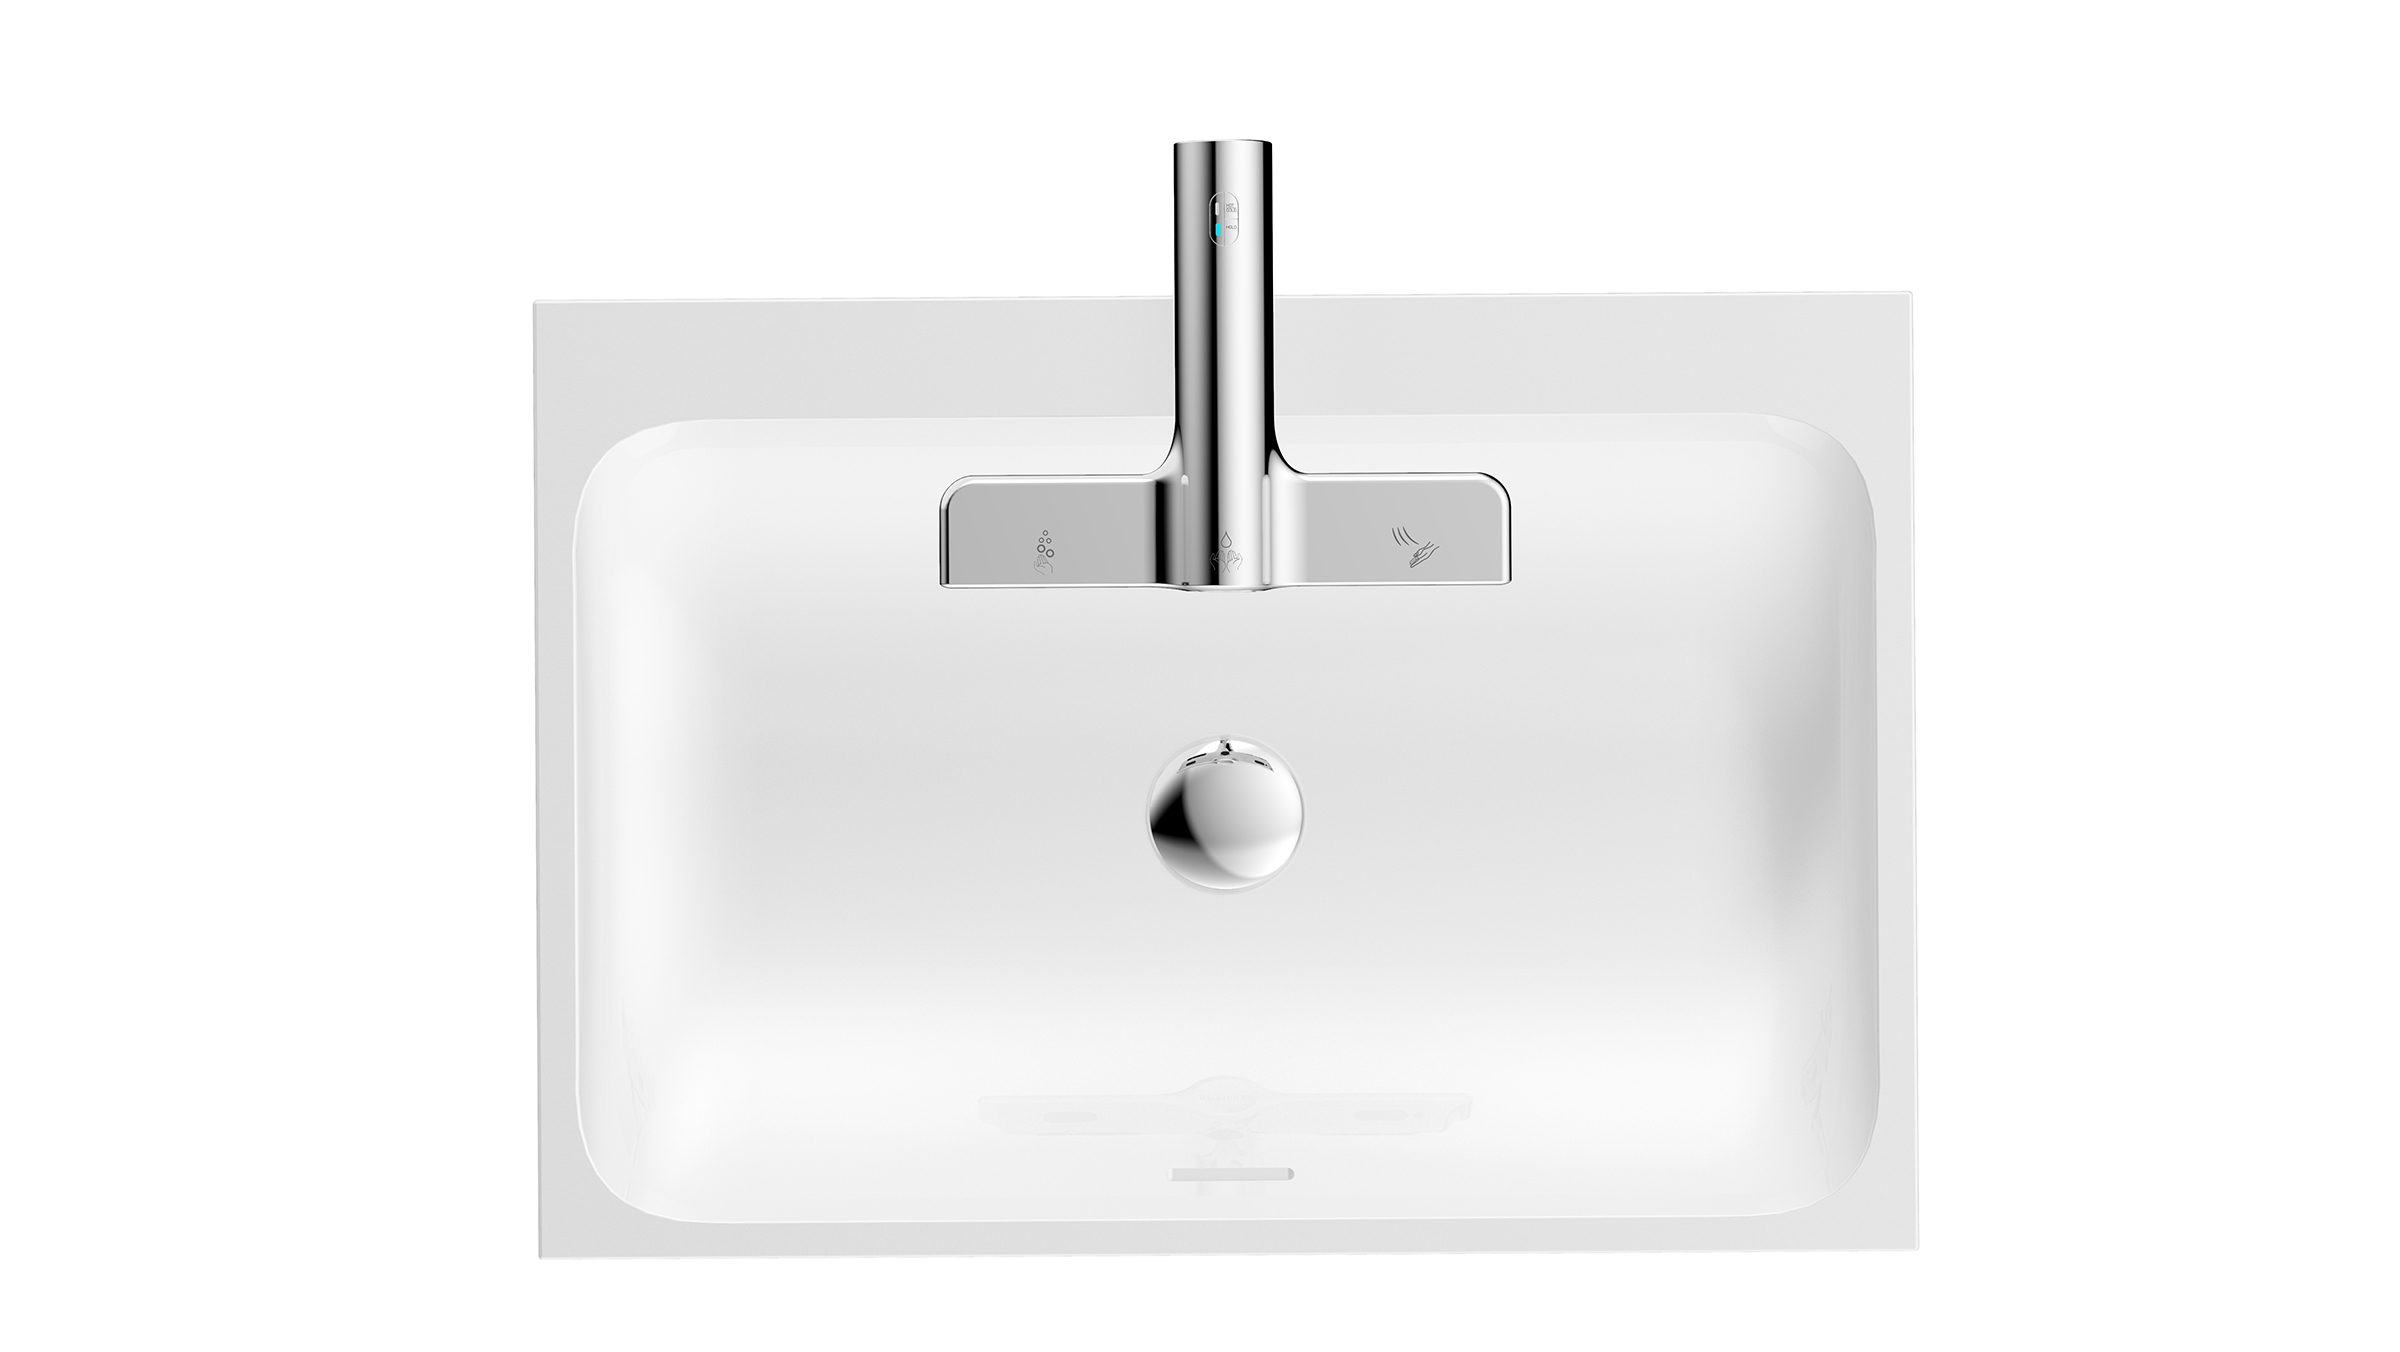 WING Faucet hand dryer